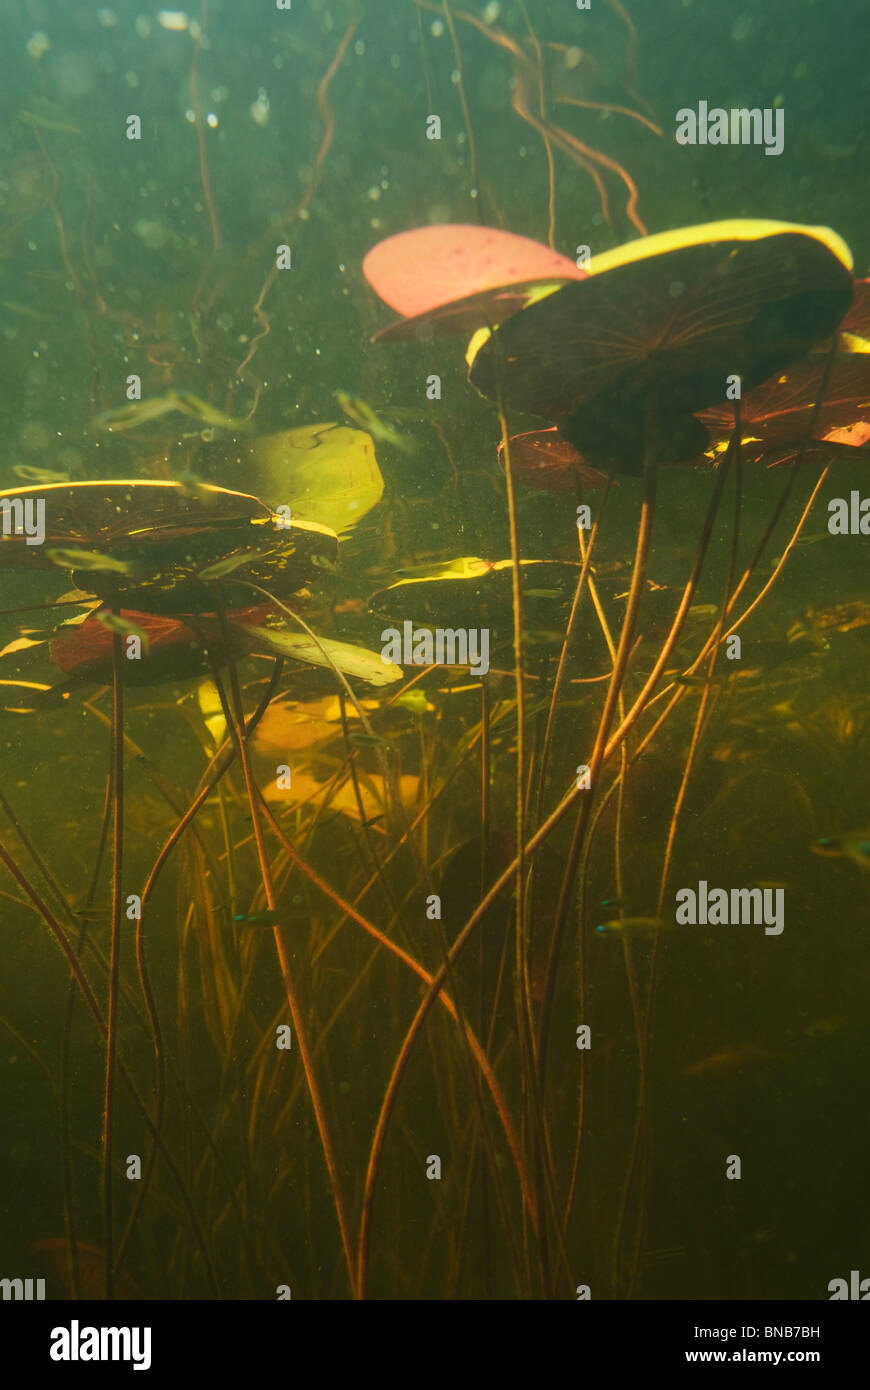 Low angle underwater of lily pads with minnows. Sunlight shining through water and leaves. Kwazulu-Natal, South Africa Stock Photo